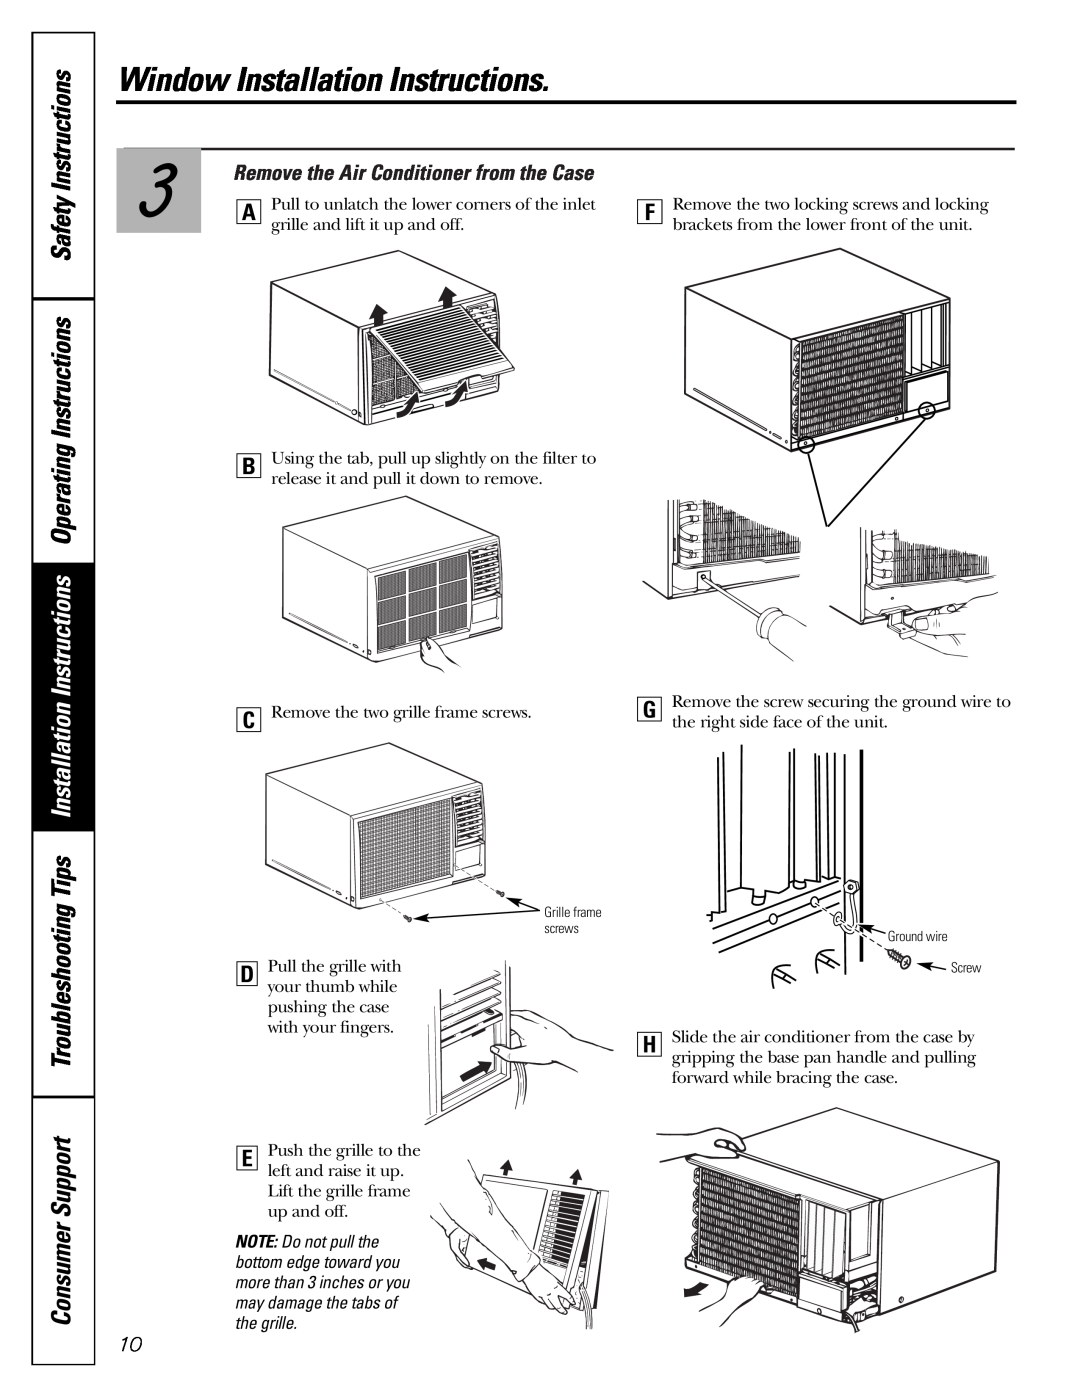 GE AKV05 Instructions Safety Instructions, Consumer Support Troubleshooting, Remove the Air Conditioner from the Case 